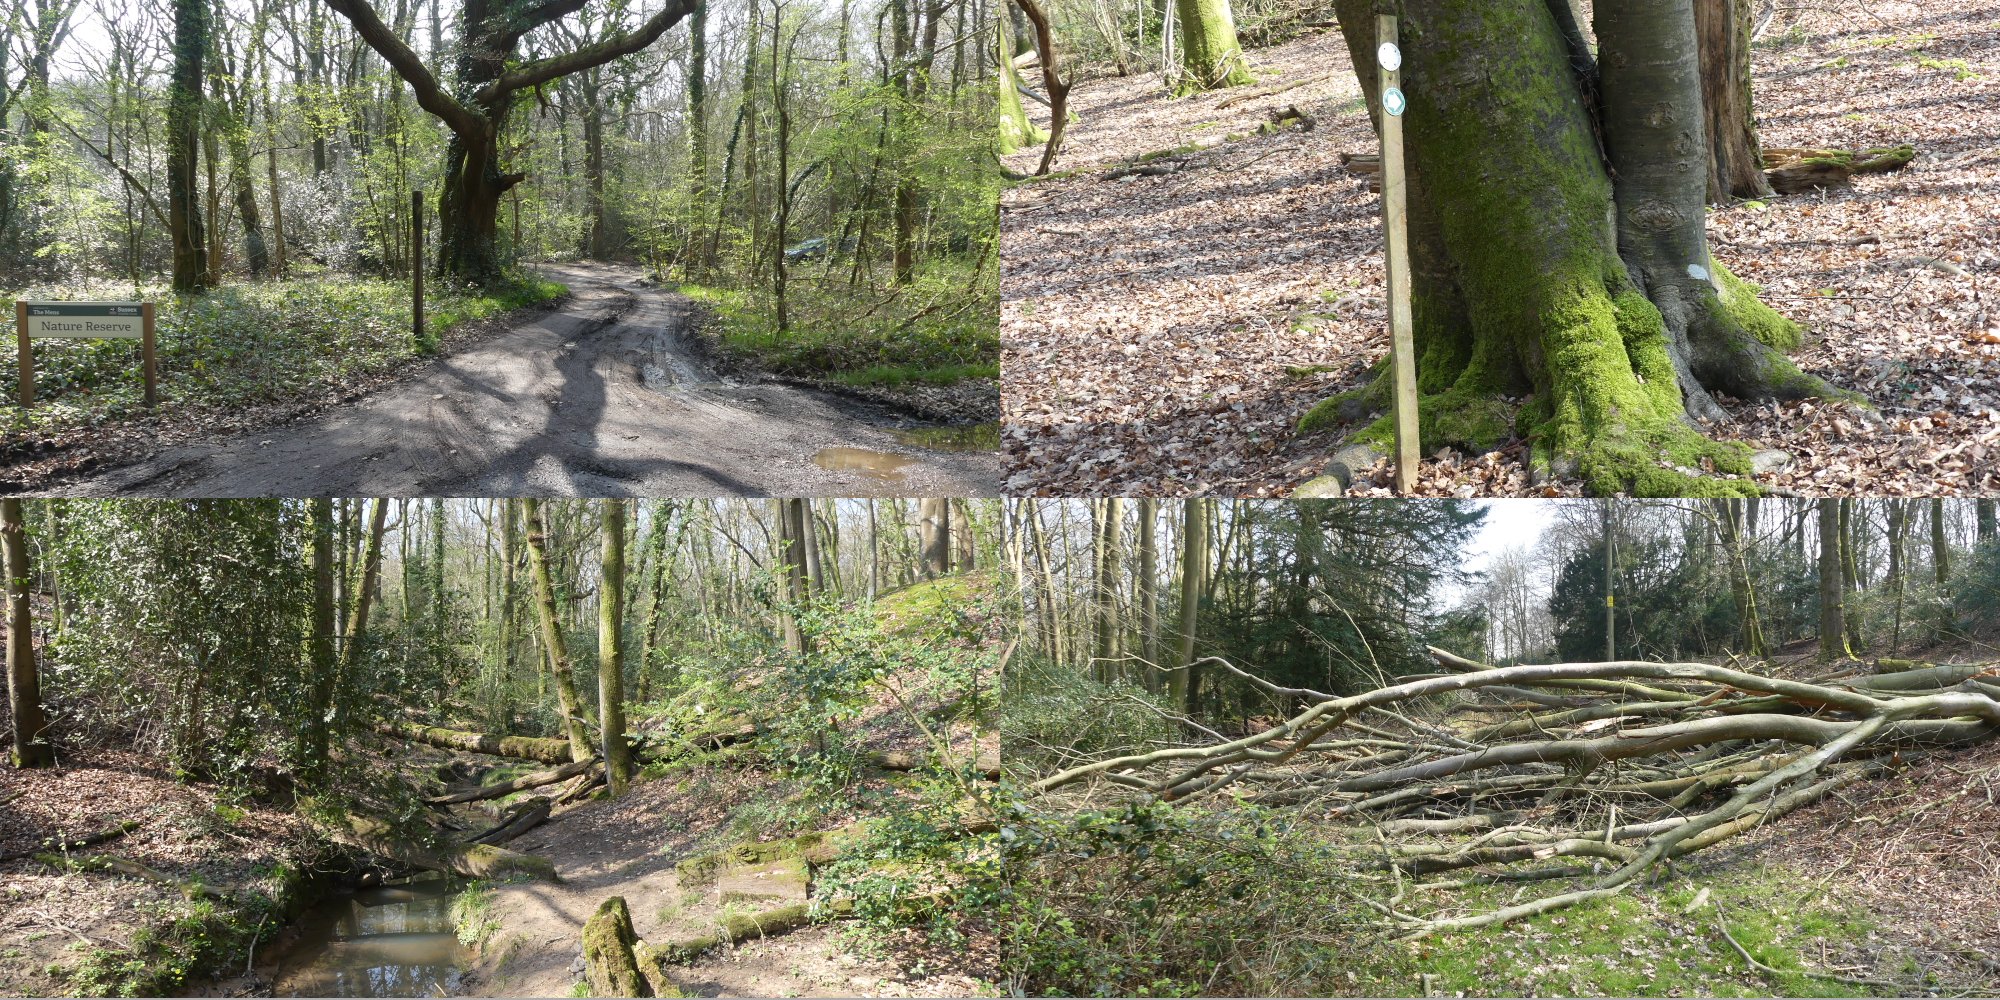 2x2 collage of shots from the woods of trees and paths